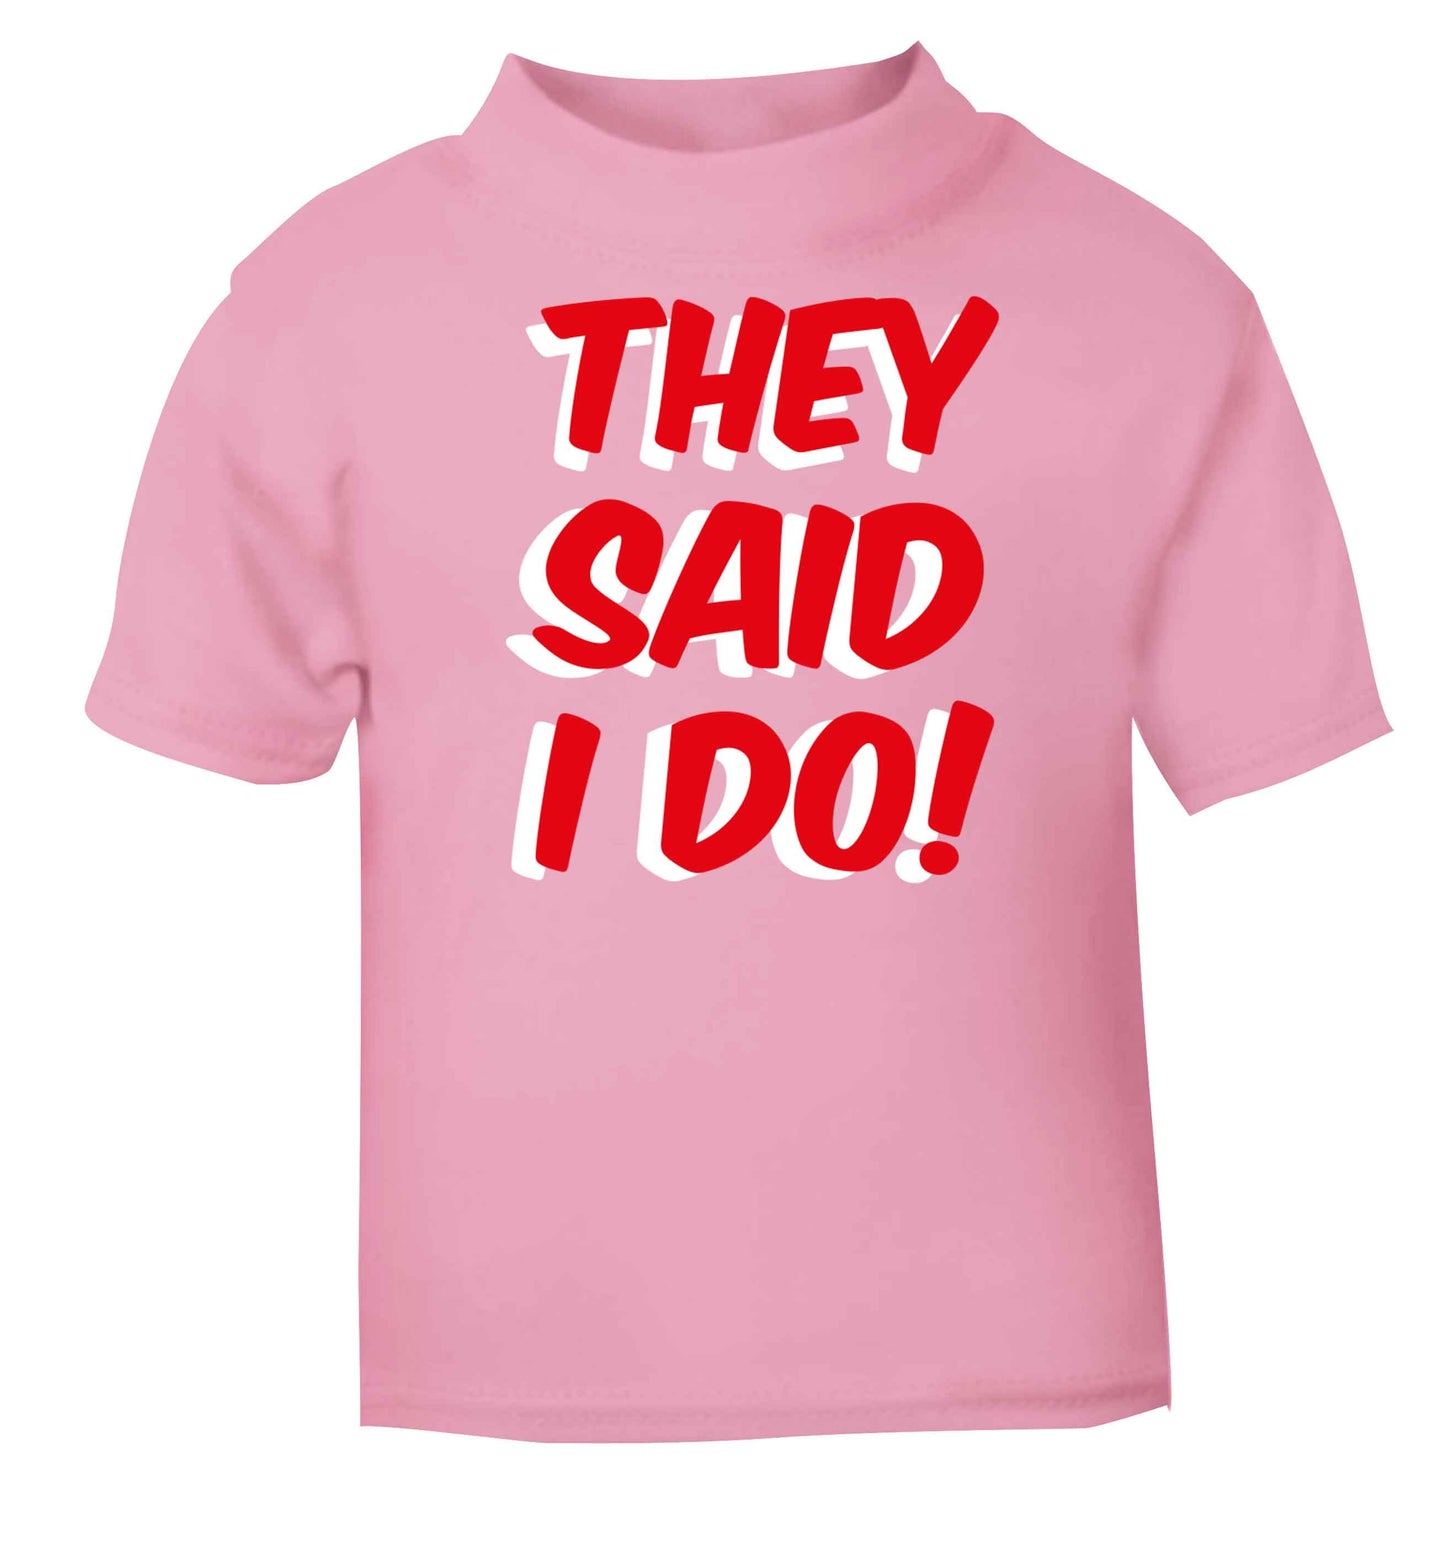 They said I do light pink baby toddler Tshirt 2 Years